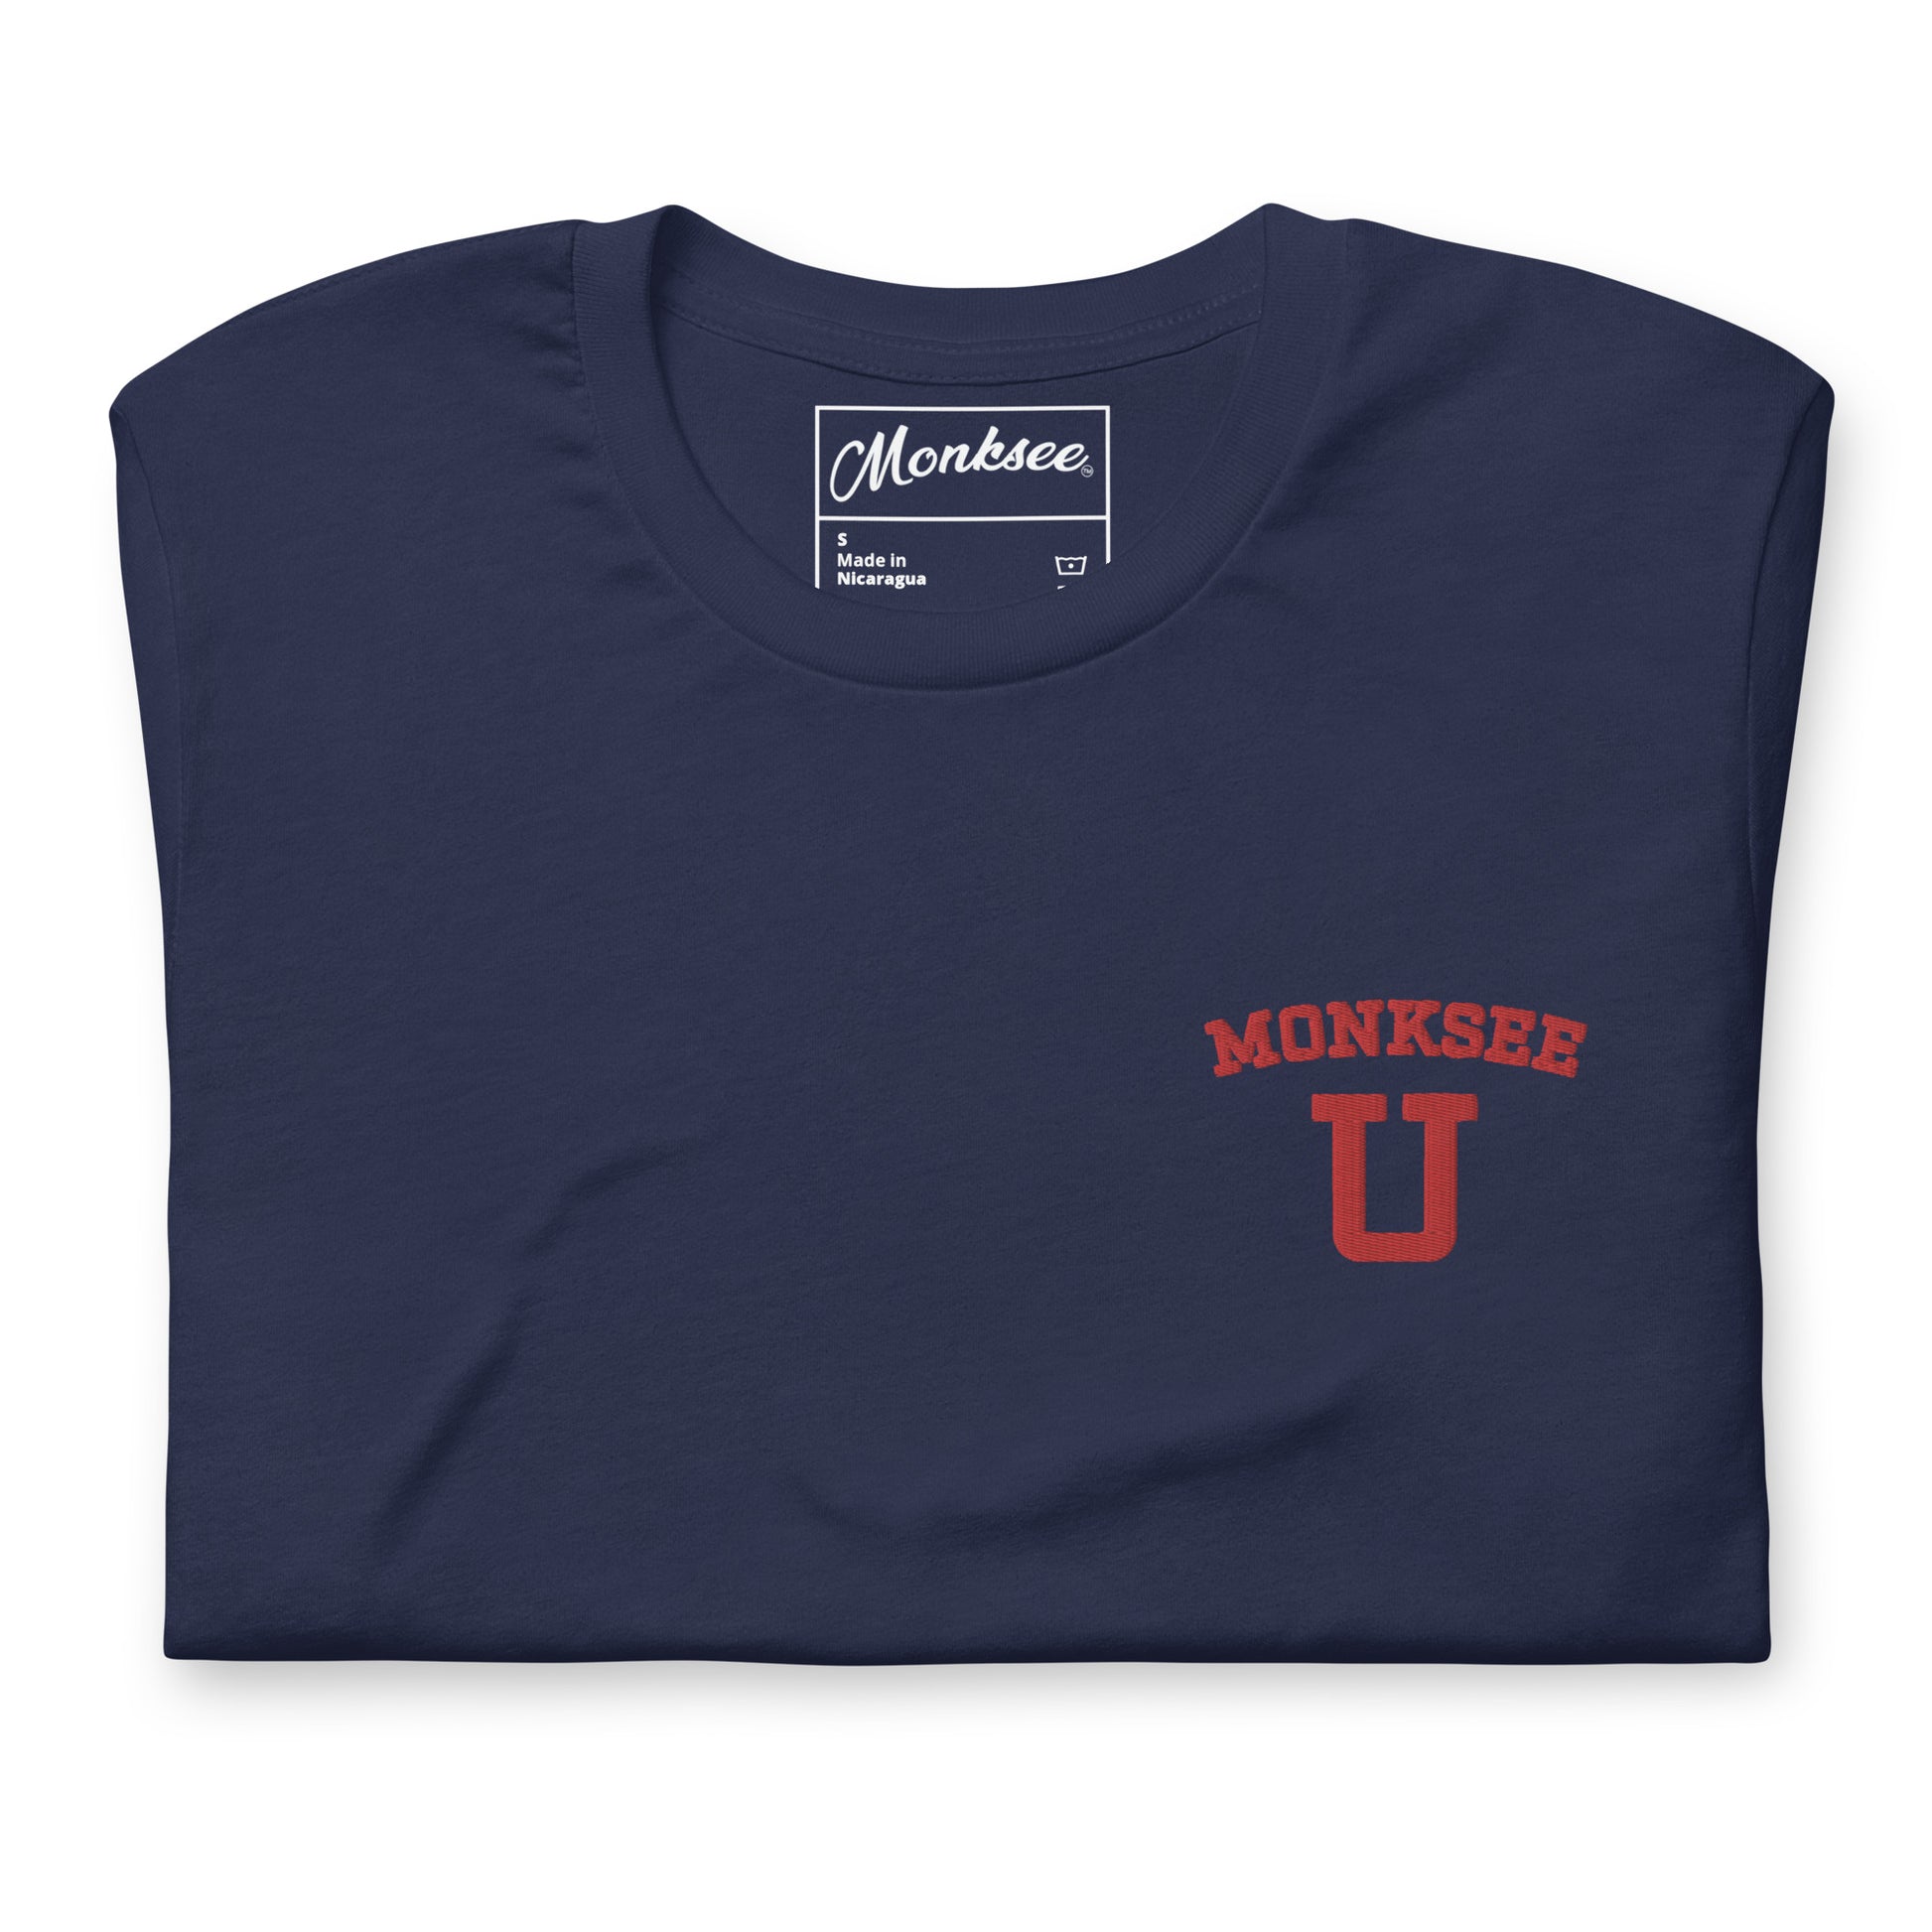 Monksee U Embroidered t-shirt.